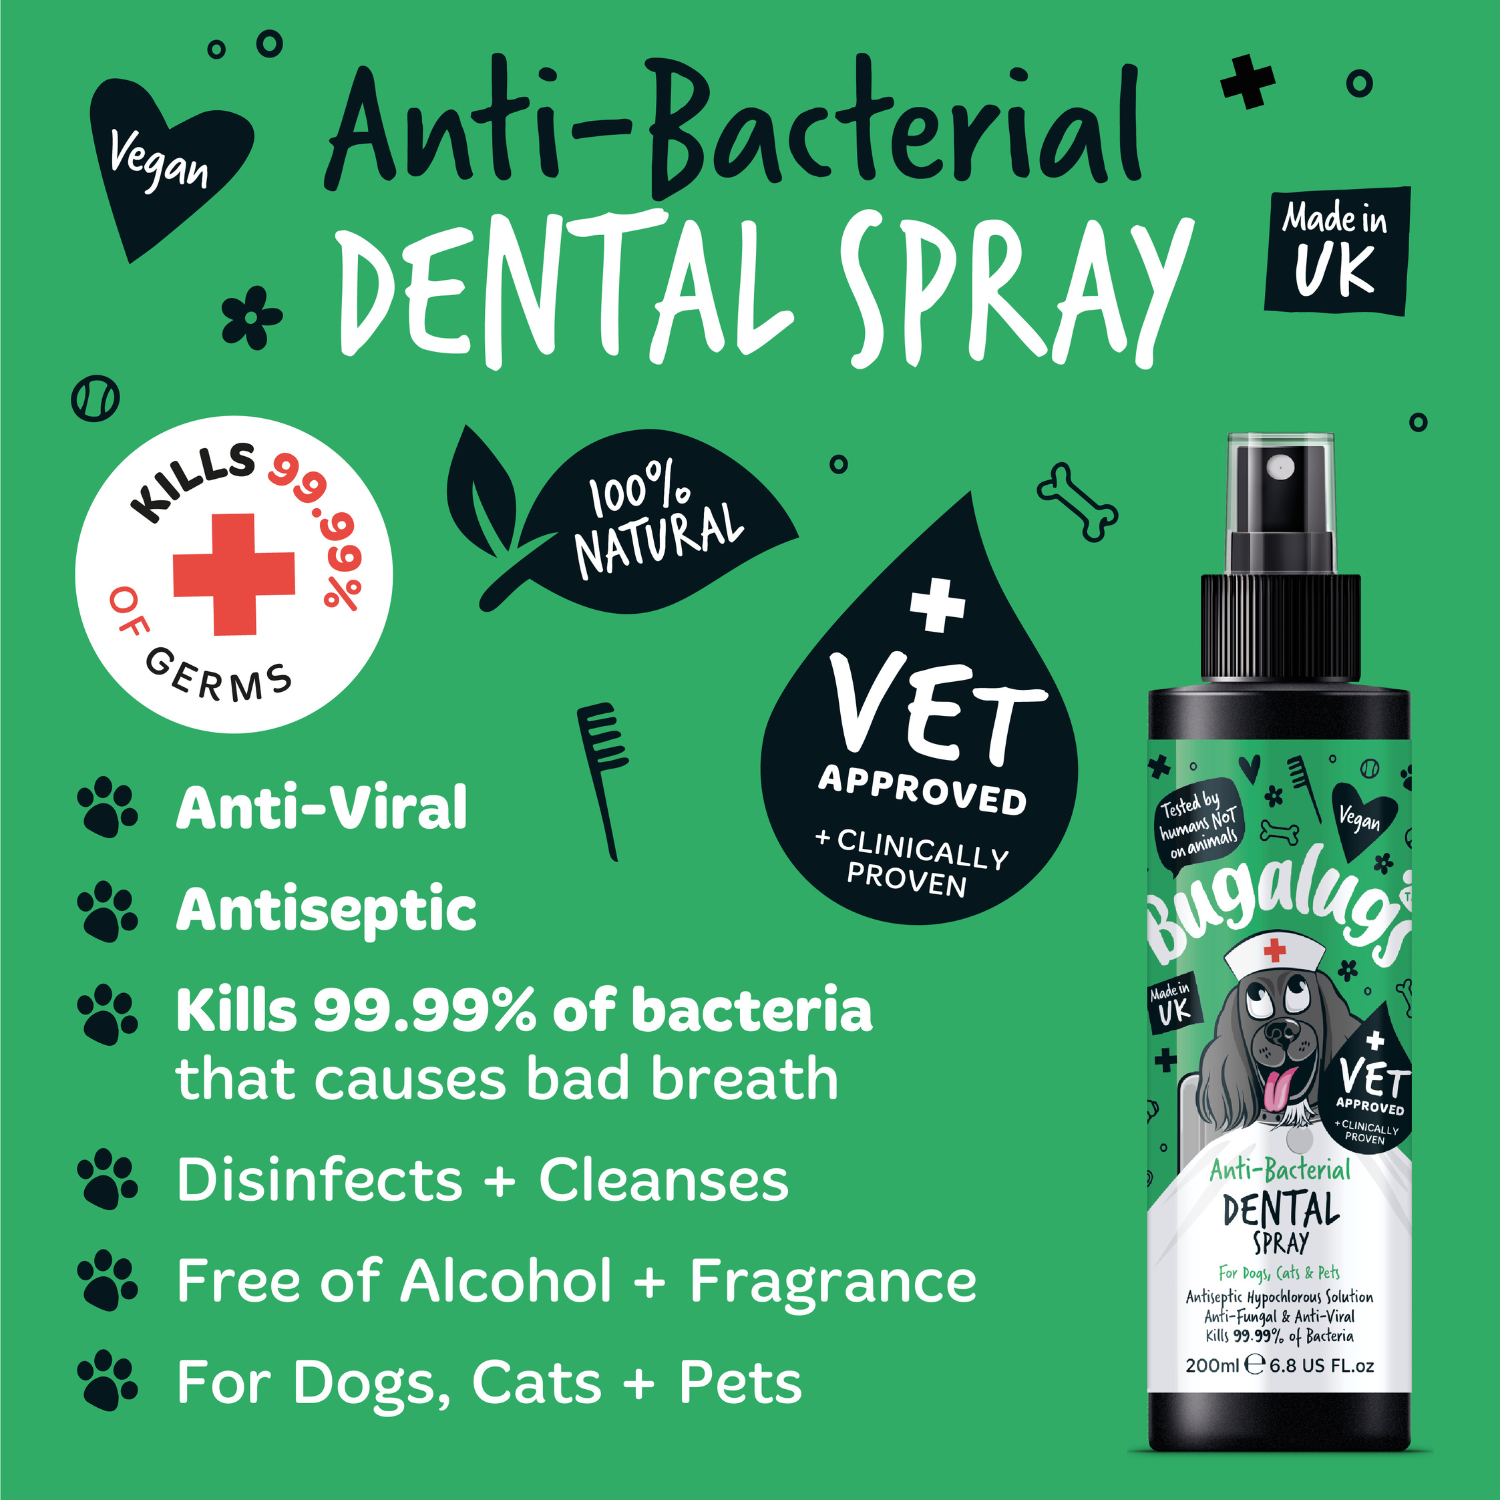 Bugalugs Anti-bacterial Dental Spray for Dogs, Cats and Pets - Anti-viral, antiseptic, kills 99.99% of bacteria